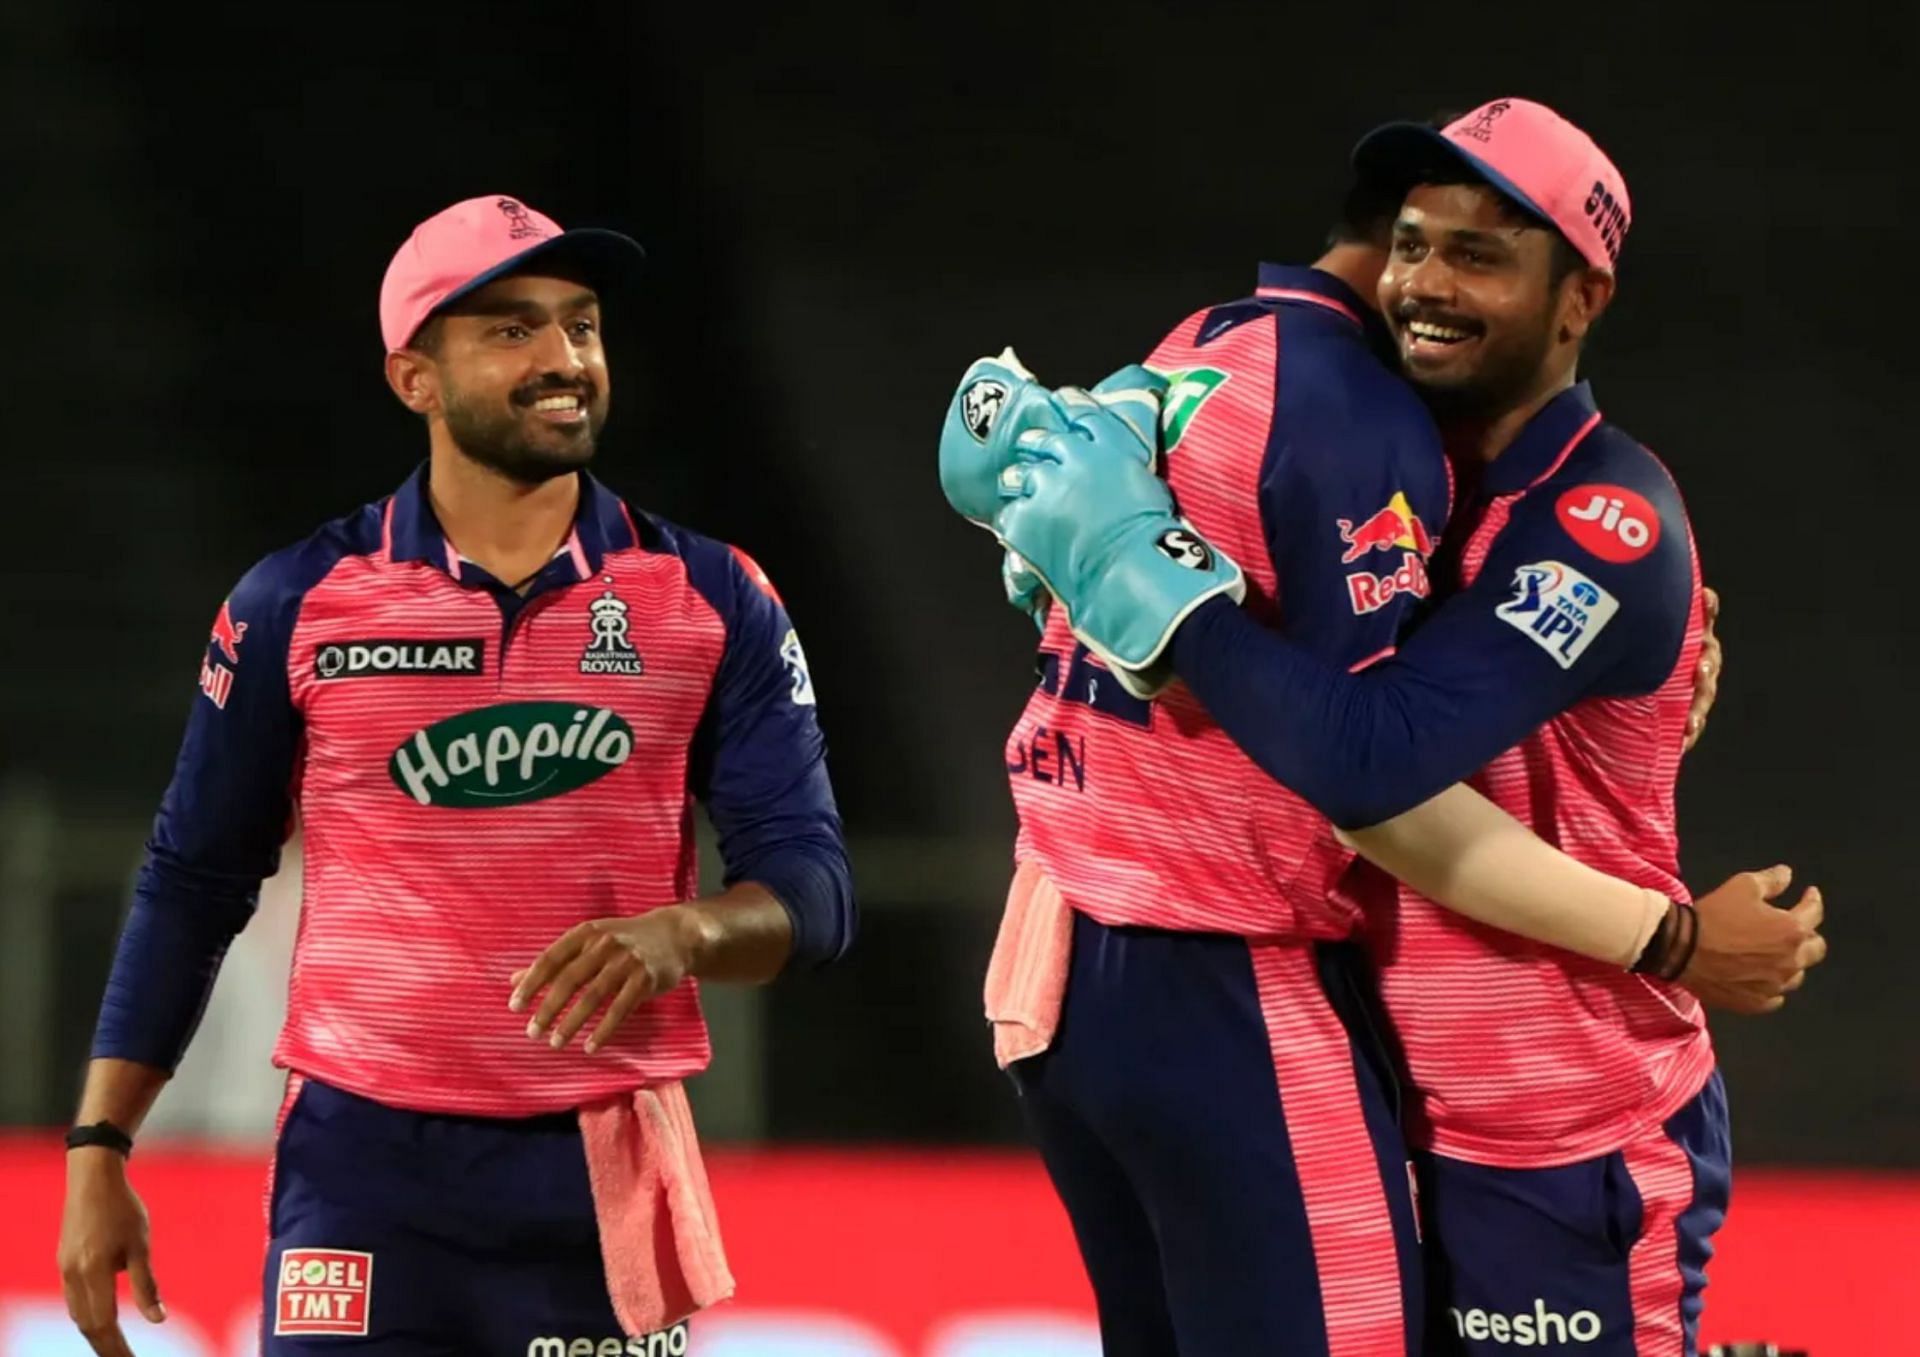 Clarity and composure - traits that RR skipper Sanju Samson (extreme right) has embodied right through IPL 2022 (Picture credits: IPL).